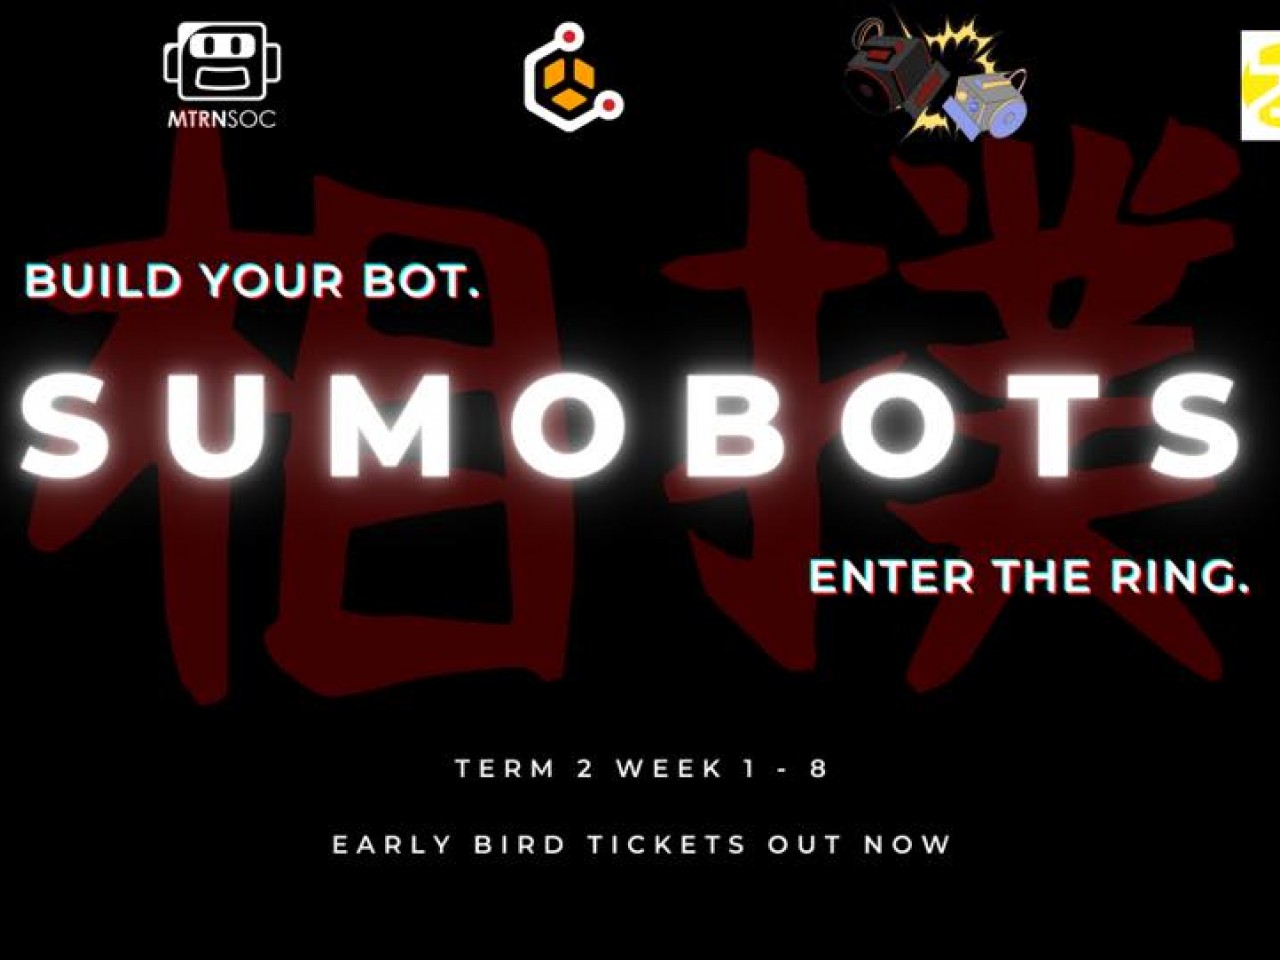 Sumobots. Enter the ring.